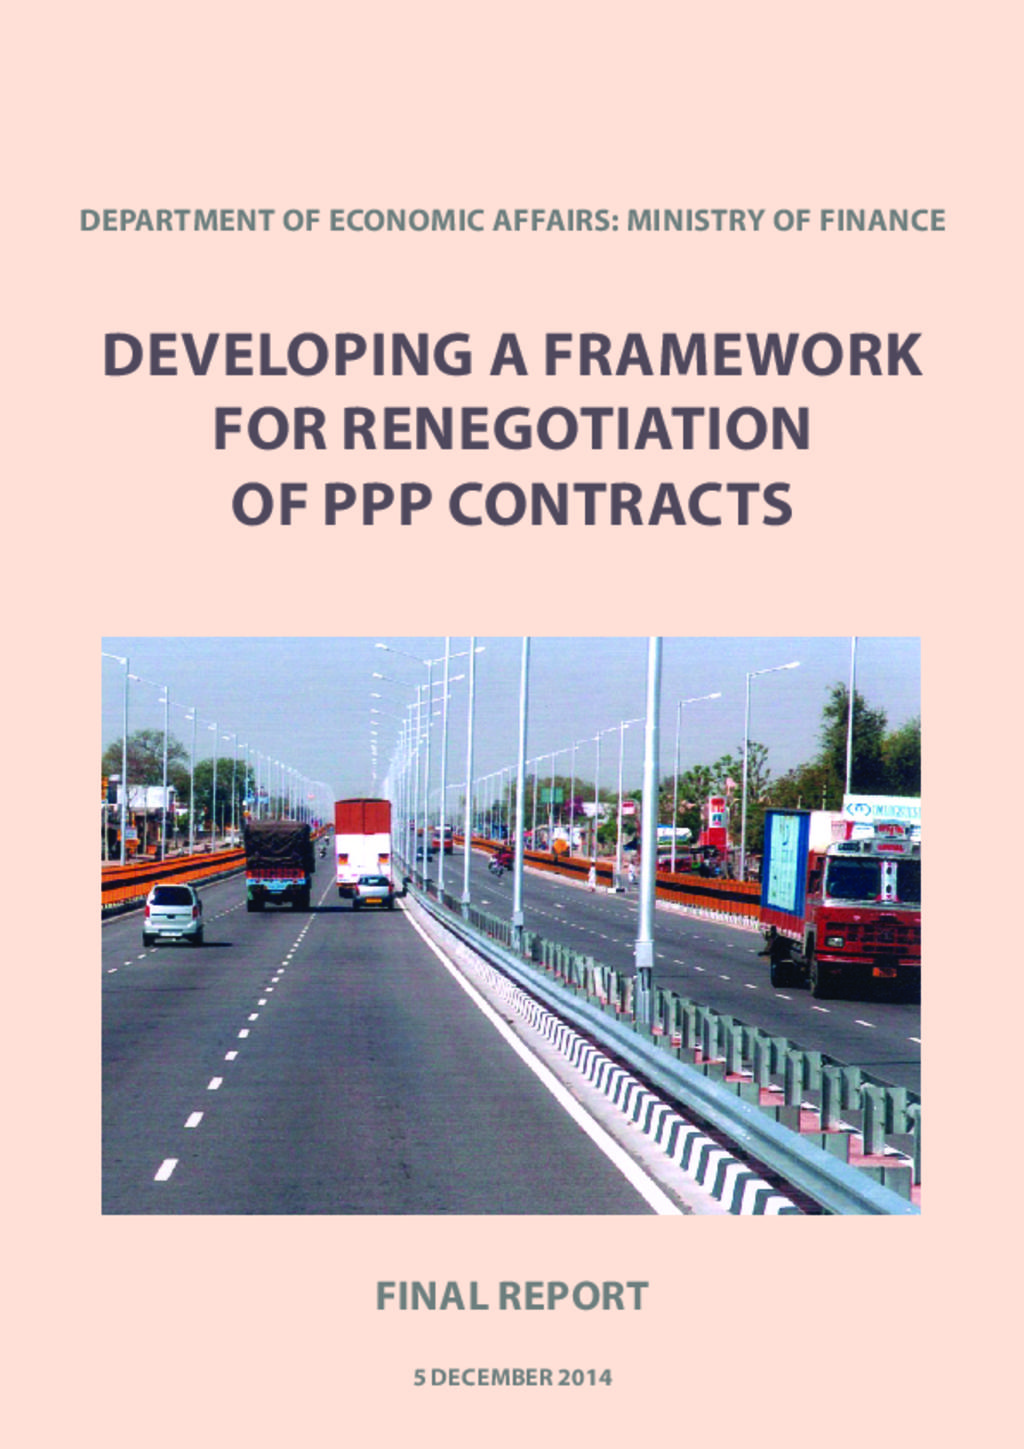  Developing a Framework for Renegotiation of PPP Contracts